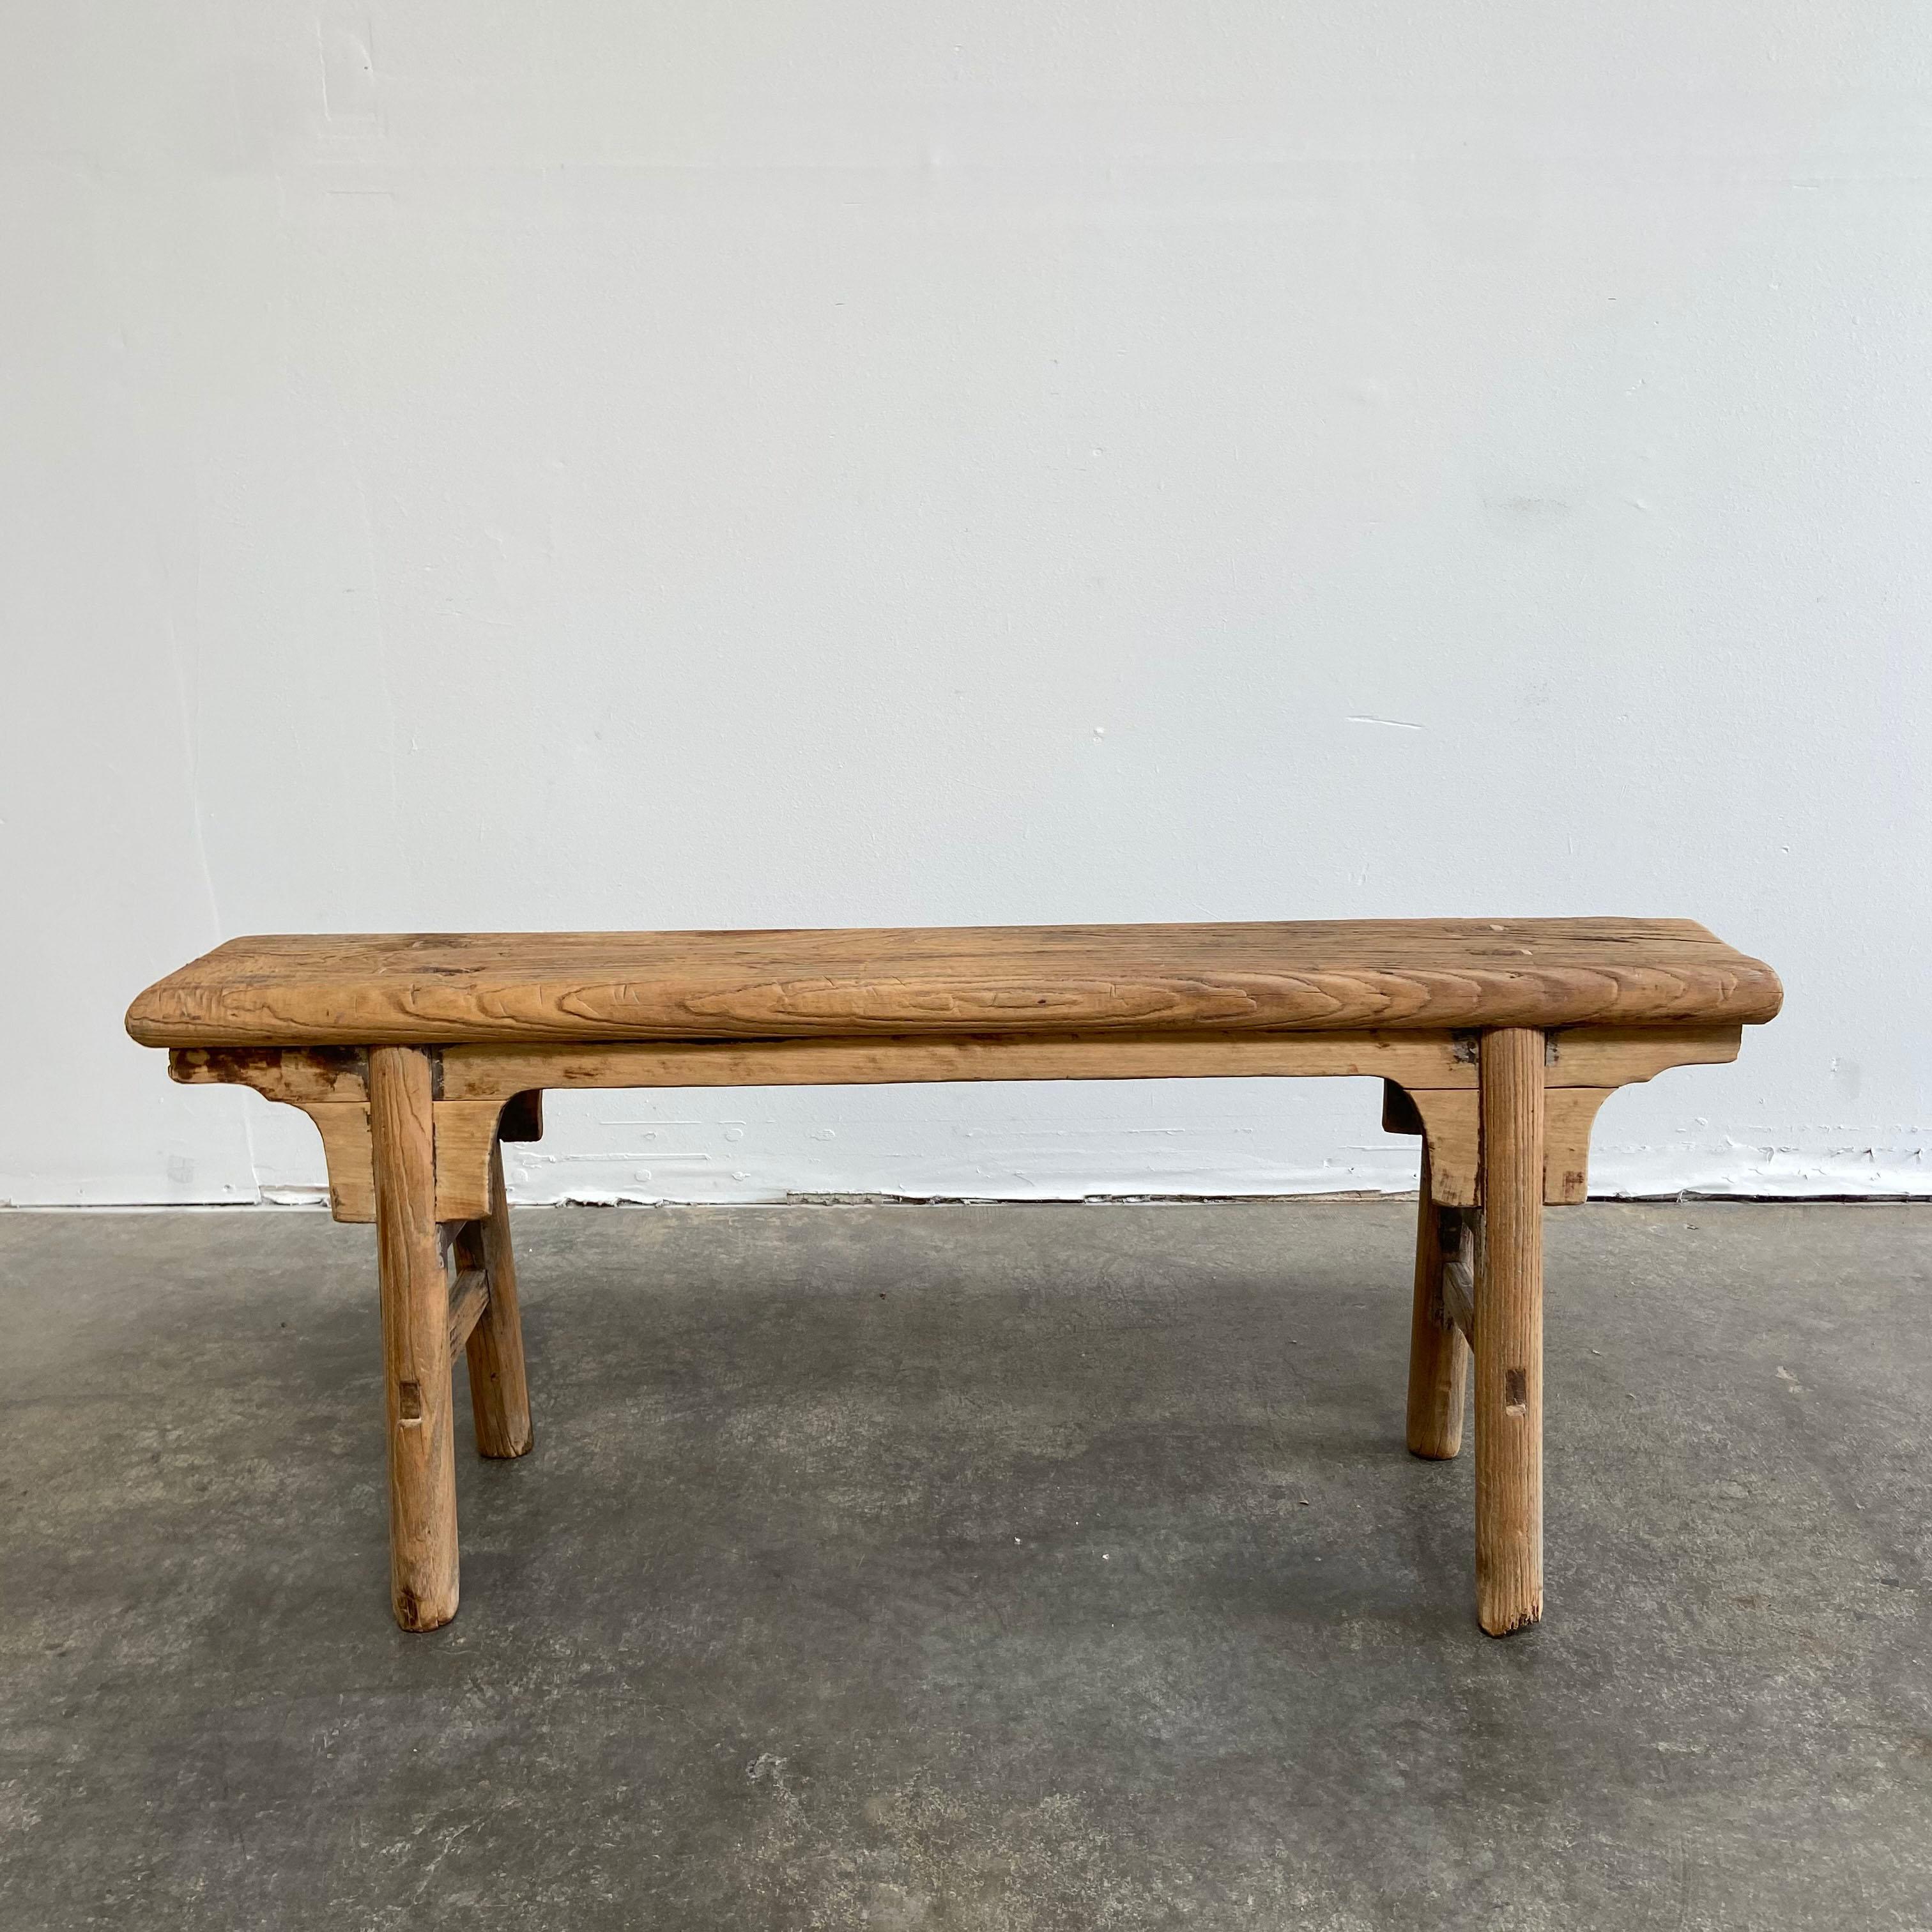 Vintage antique elm wood skinny bench
These are the real vintage antique elm wood benches! Beautiful antique patina, with weathering and age, these are solid and sturdy ready for daily use, use as a table behind a sofa, stool, coffee table, they